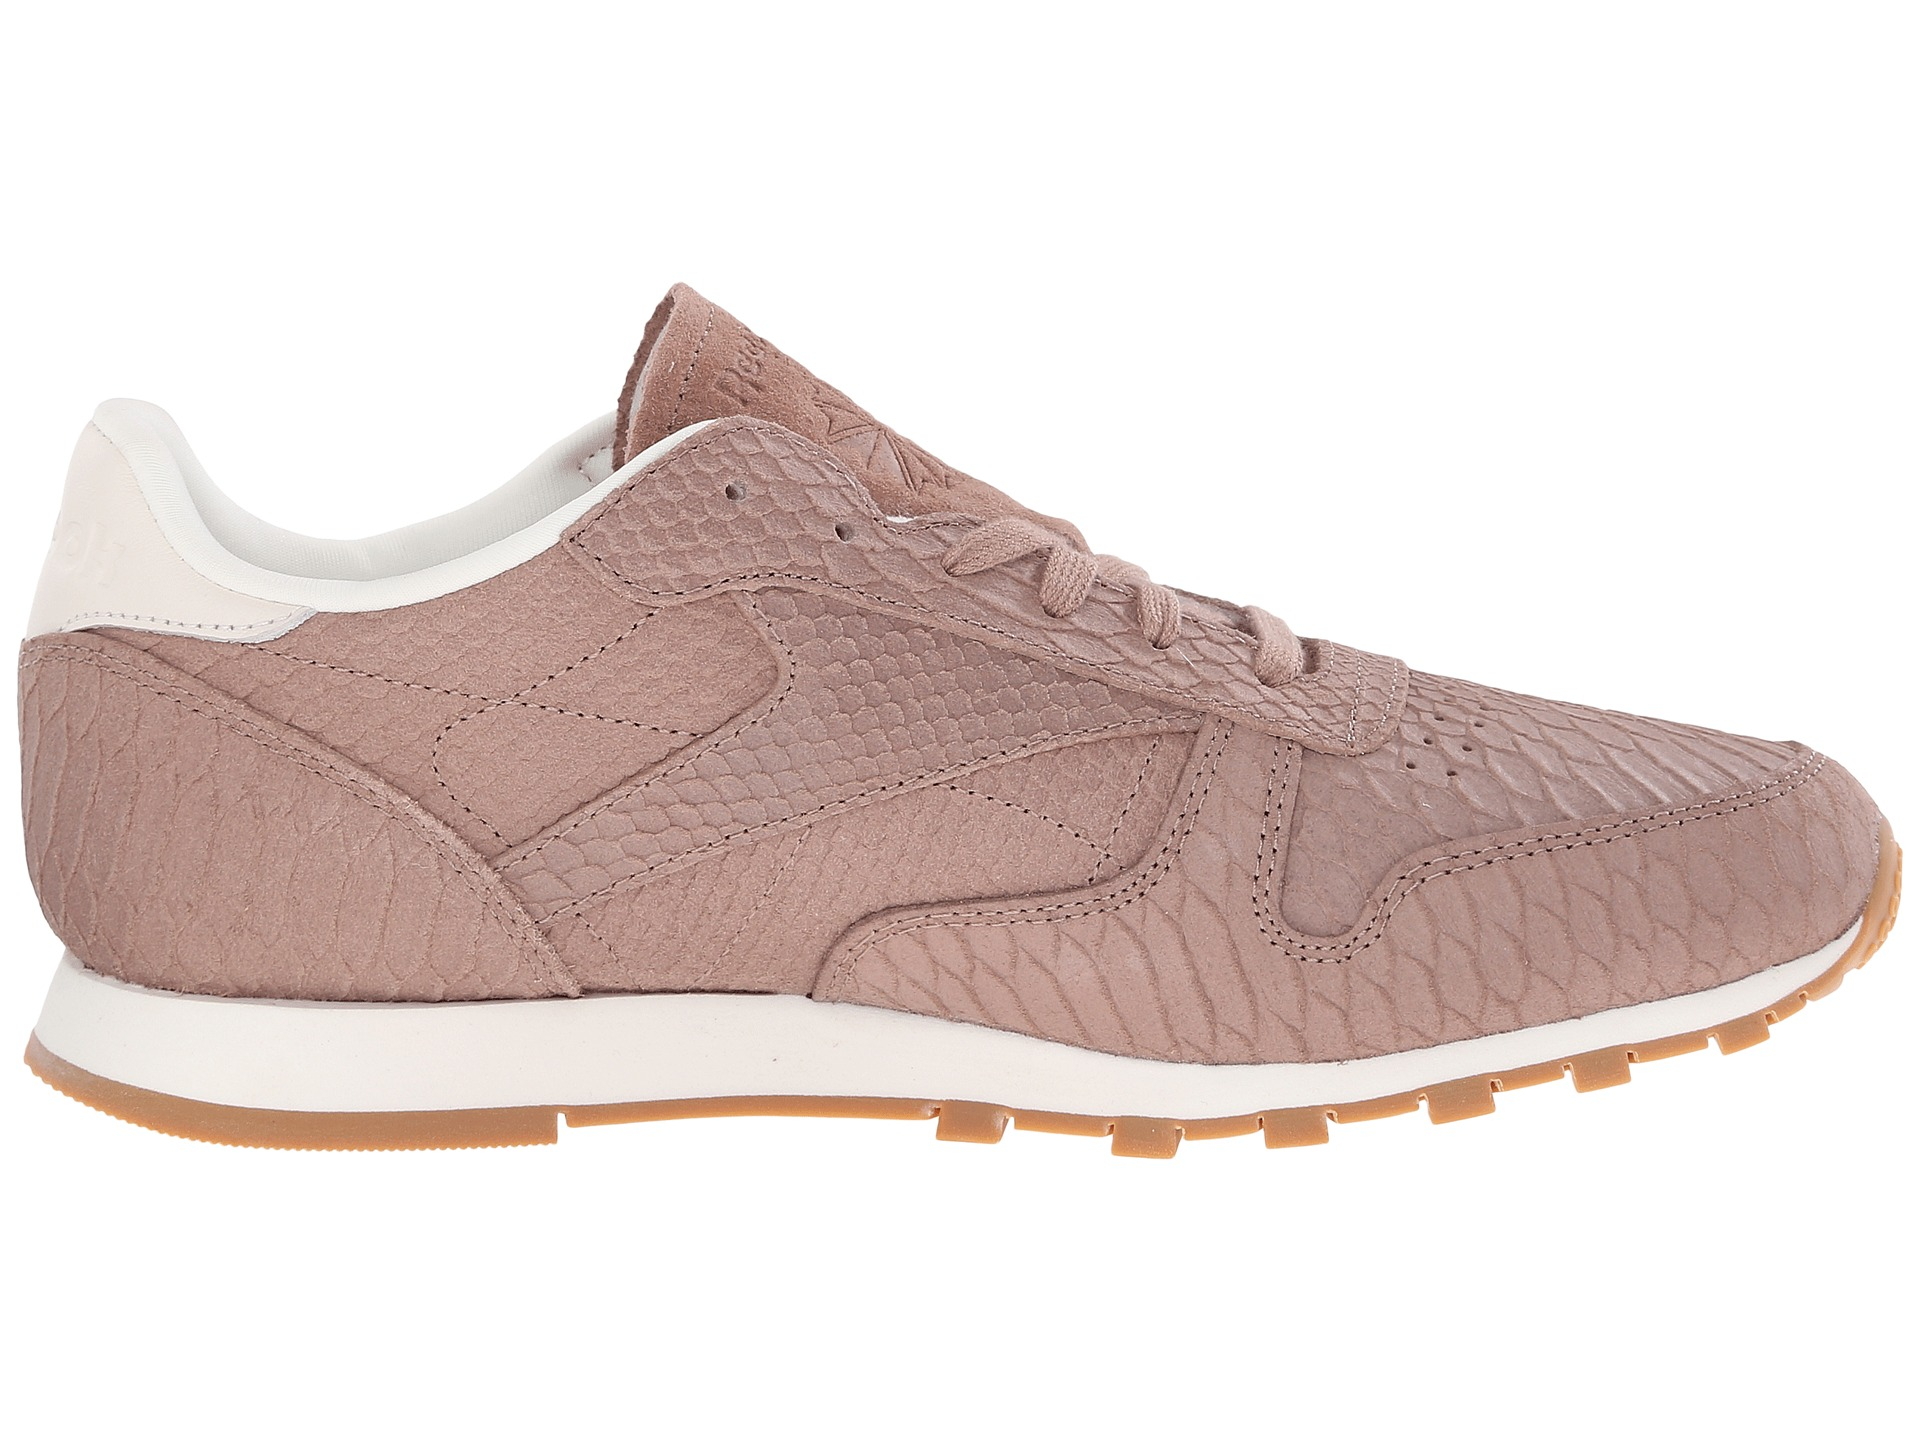 reebok classic clean exotic taupe